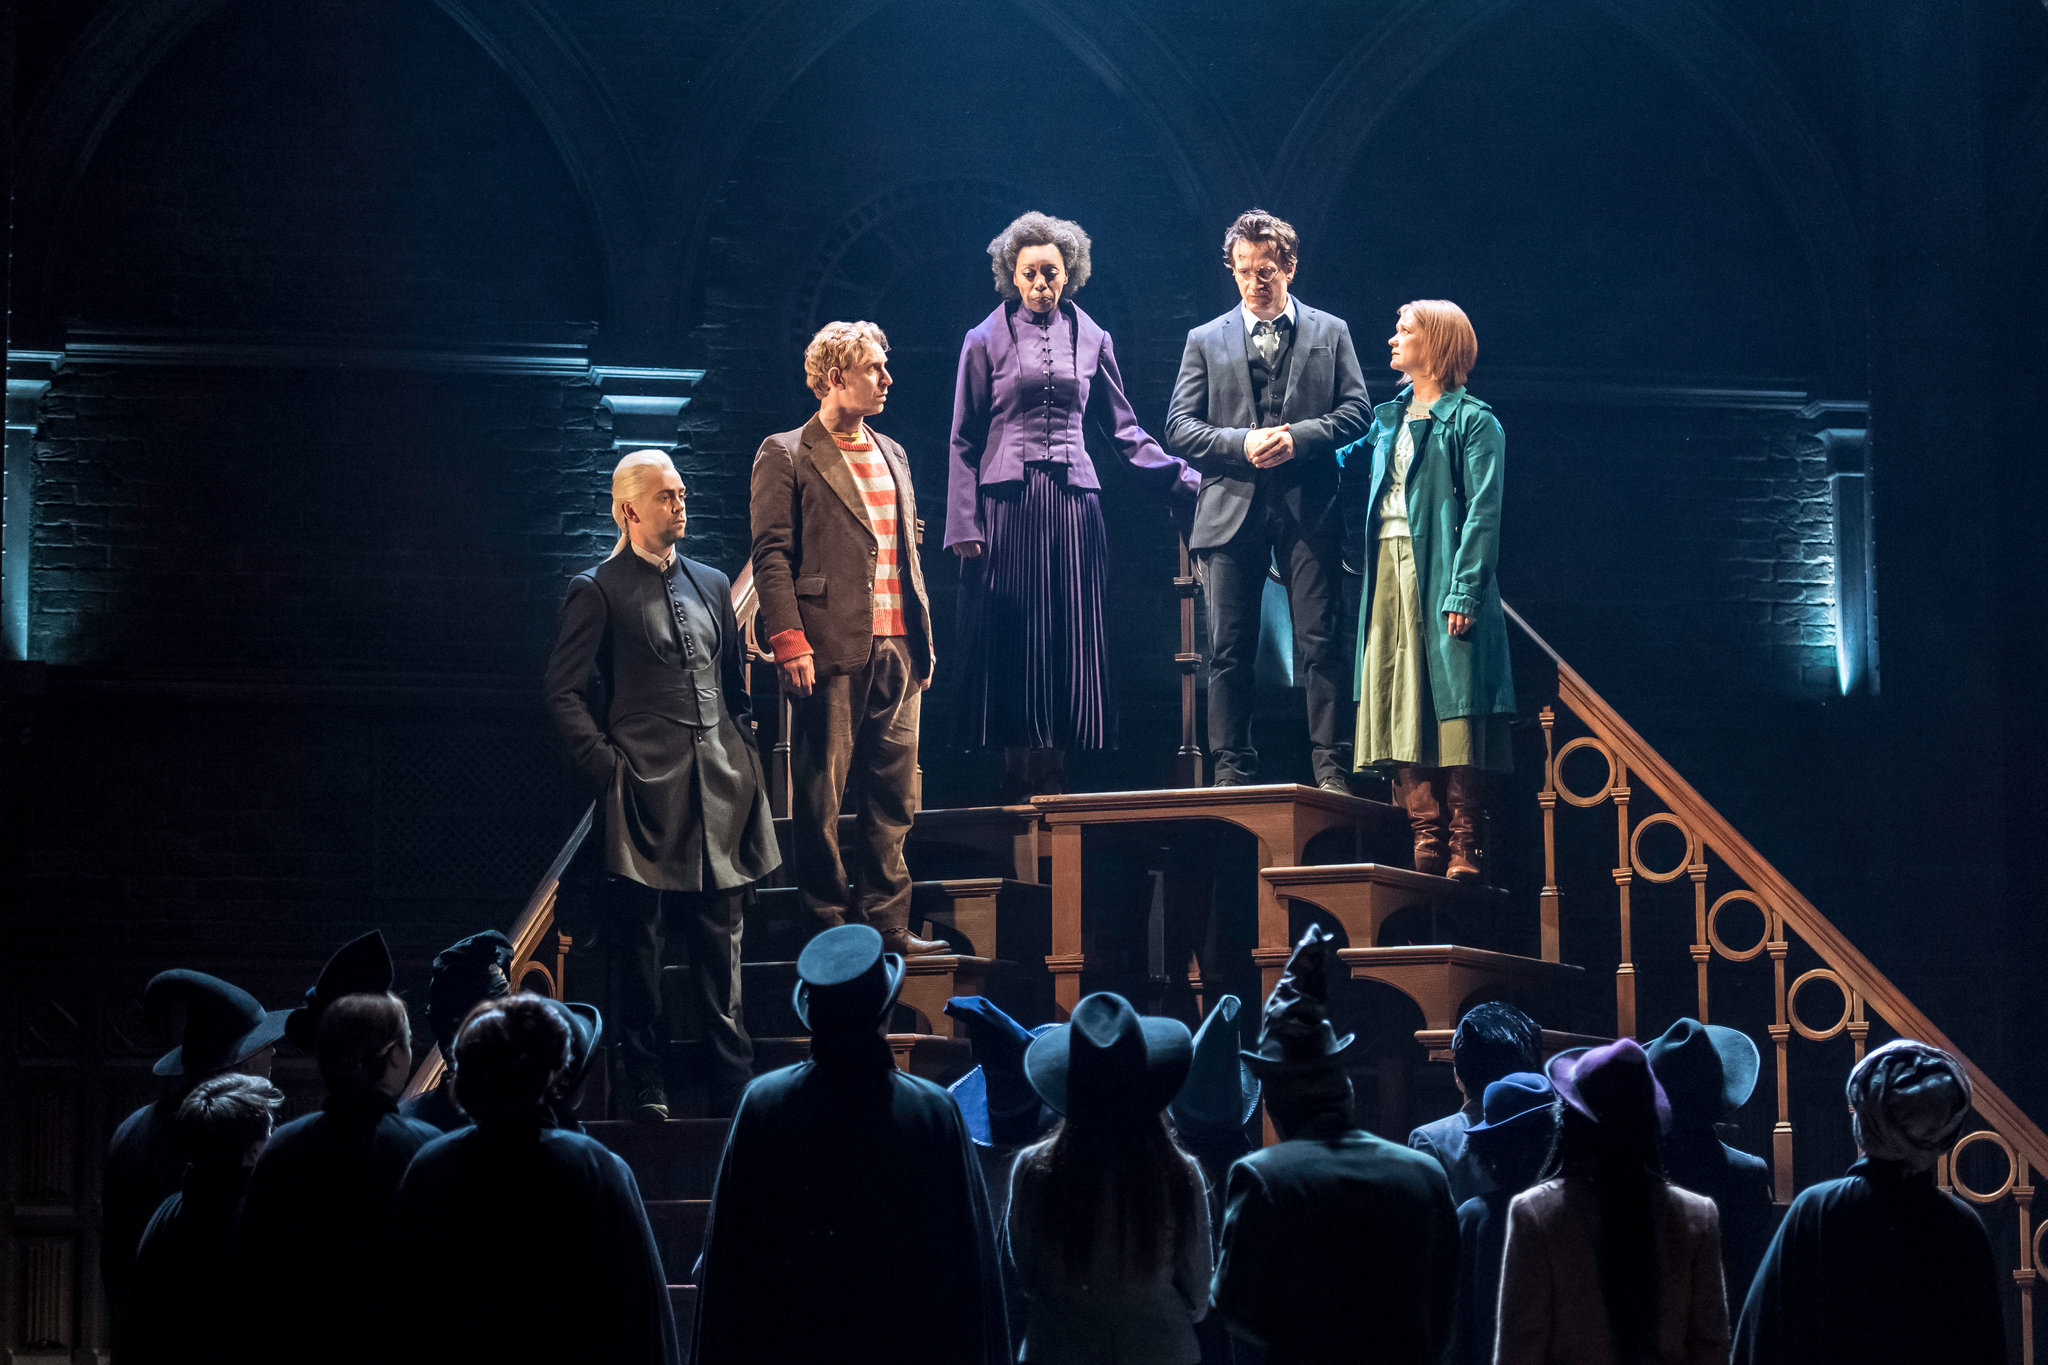 Harry Potter and The Cursed Child - Part 1 & 2 (5/7 7:30PM & 5/8 7:30PM) at Lyric Theatre